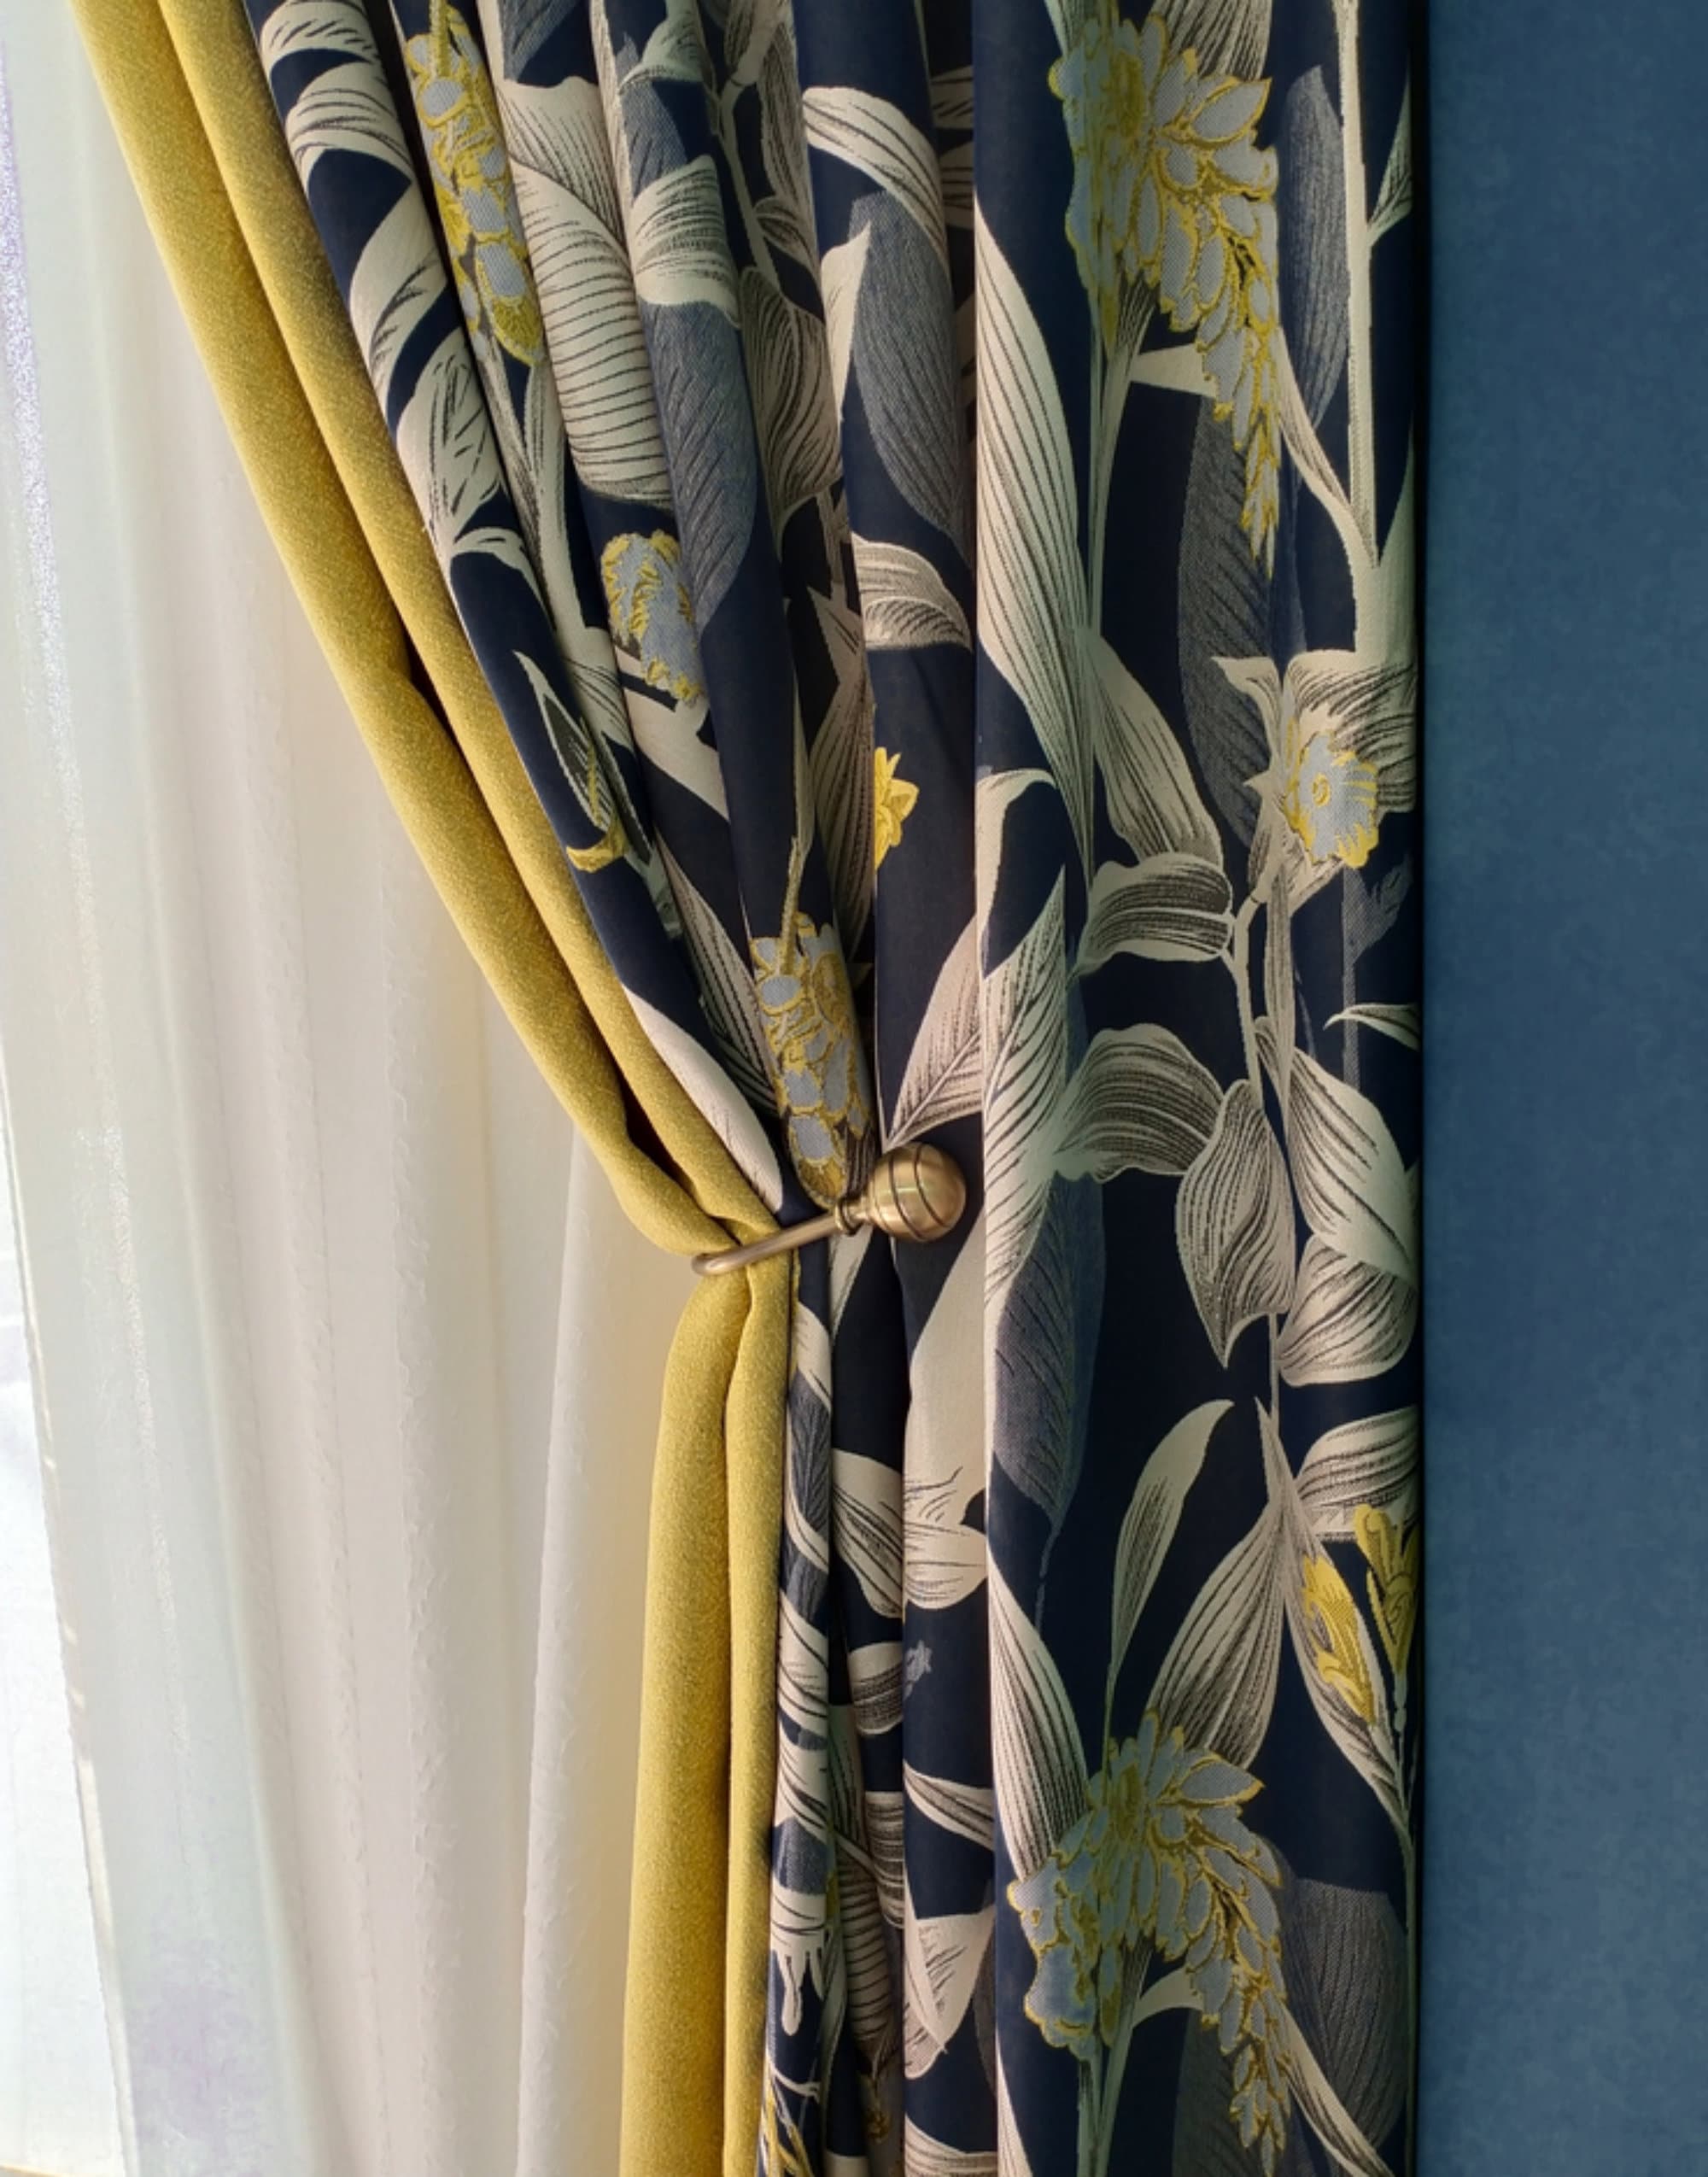 Navy Blue White Leaf Pattern Drapes Blackout Curtains for Sale